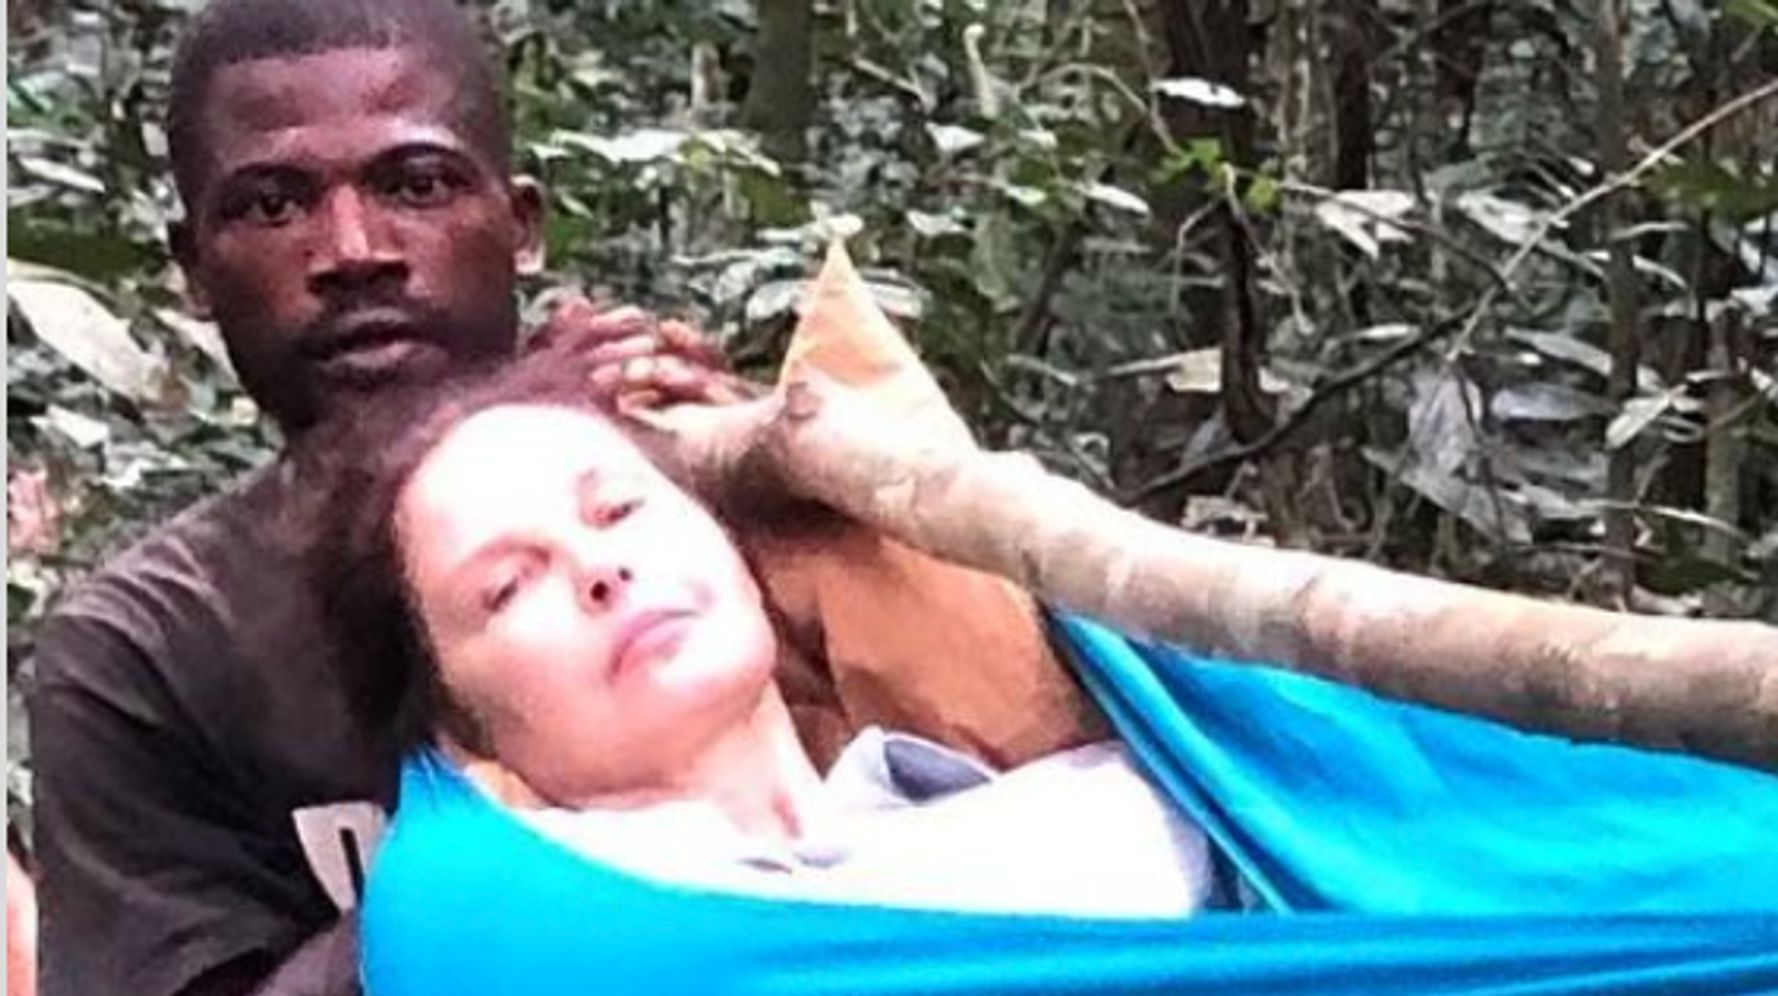 Ashley Judd’s photos of her disturbing rescue in Congo highlight the heroes